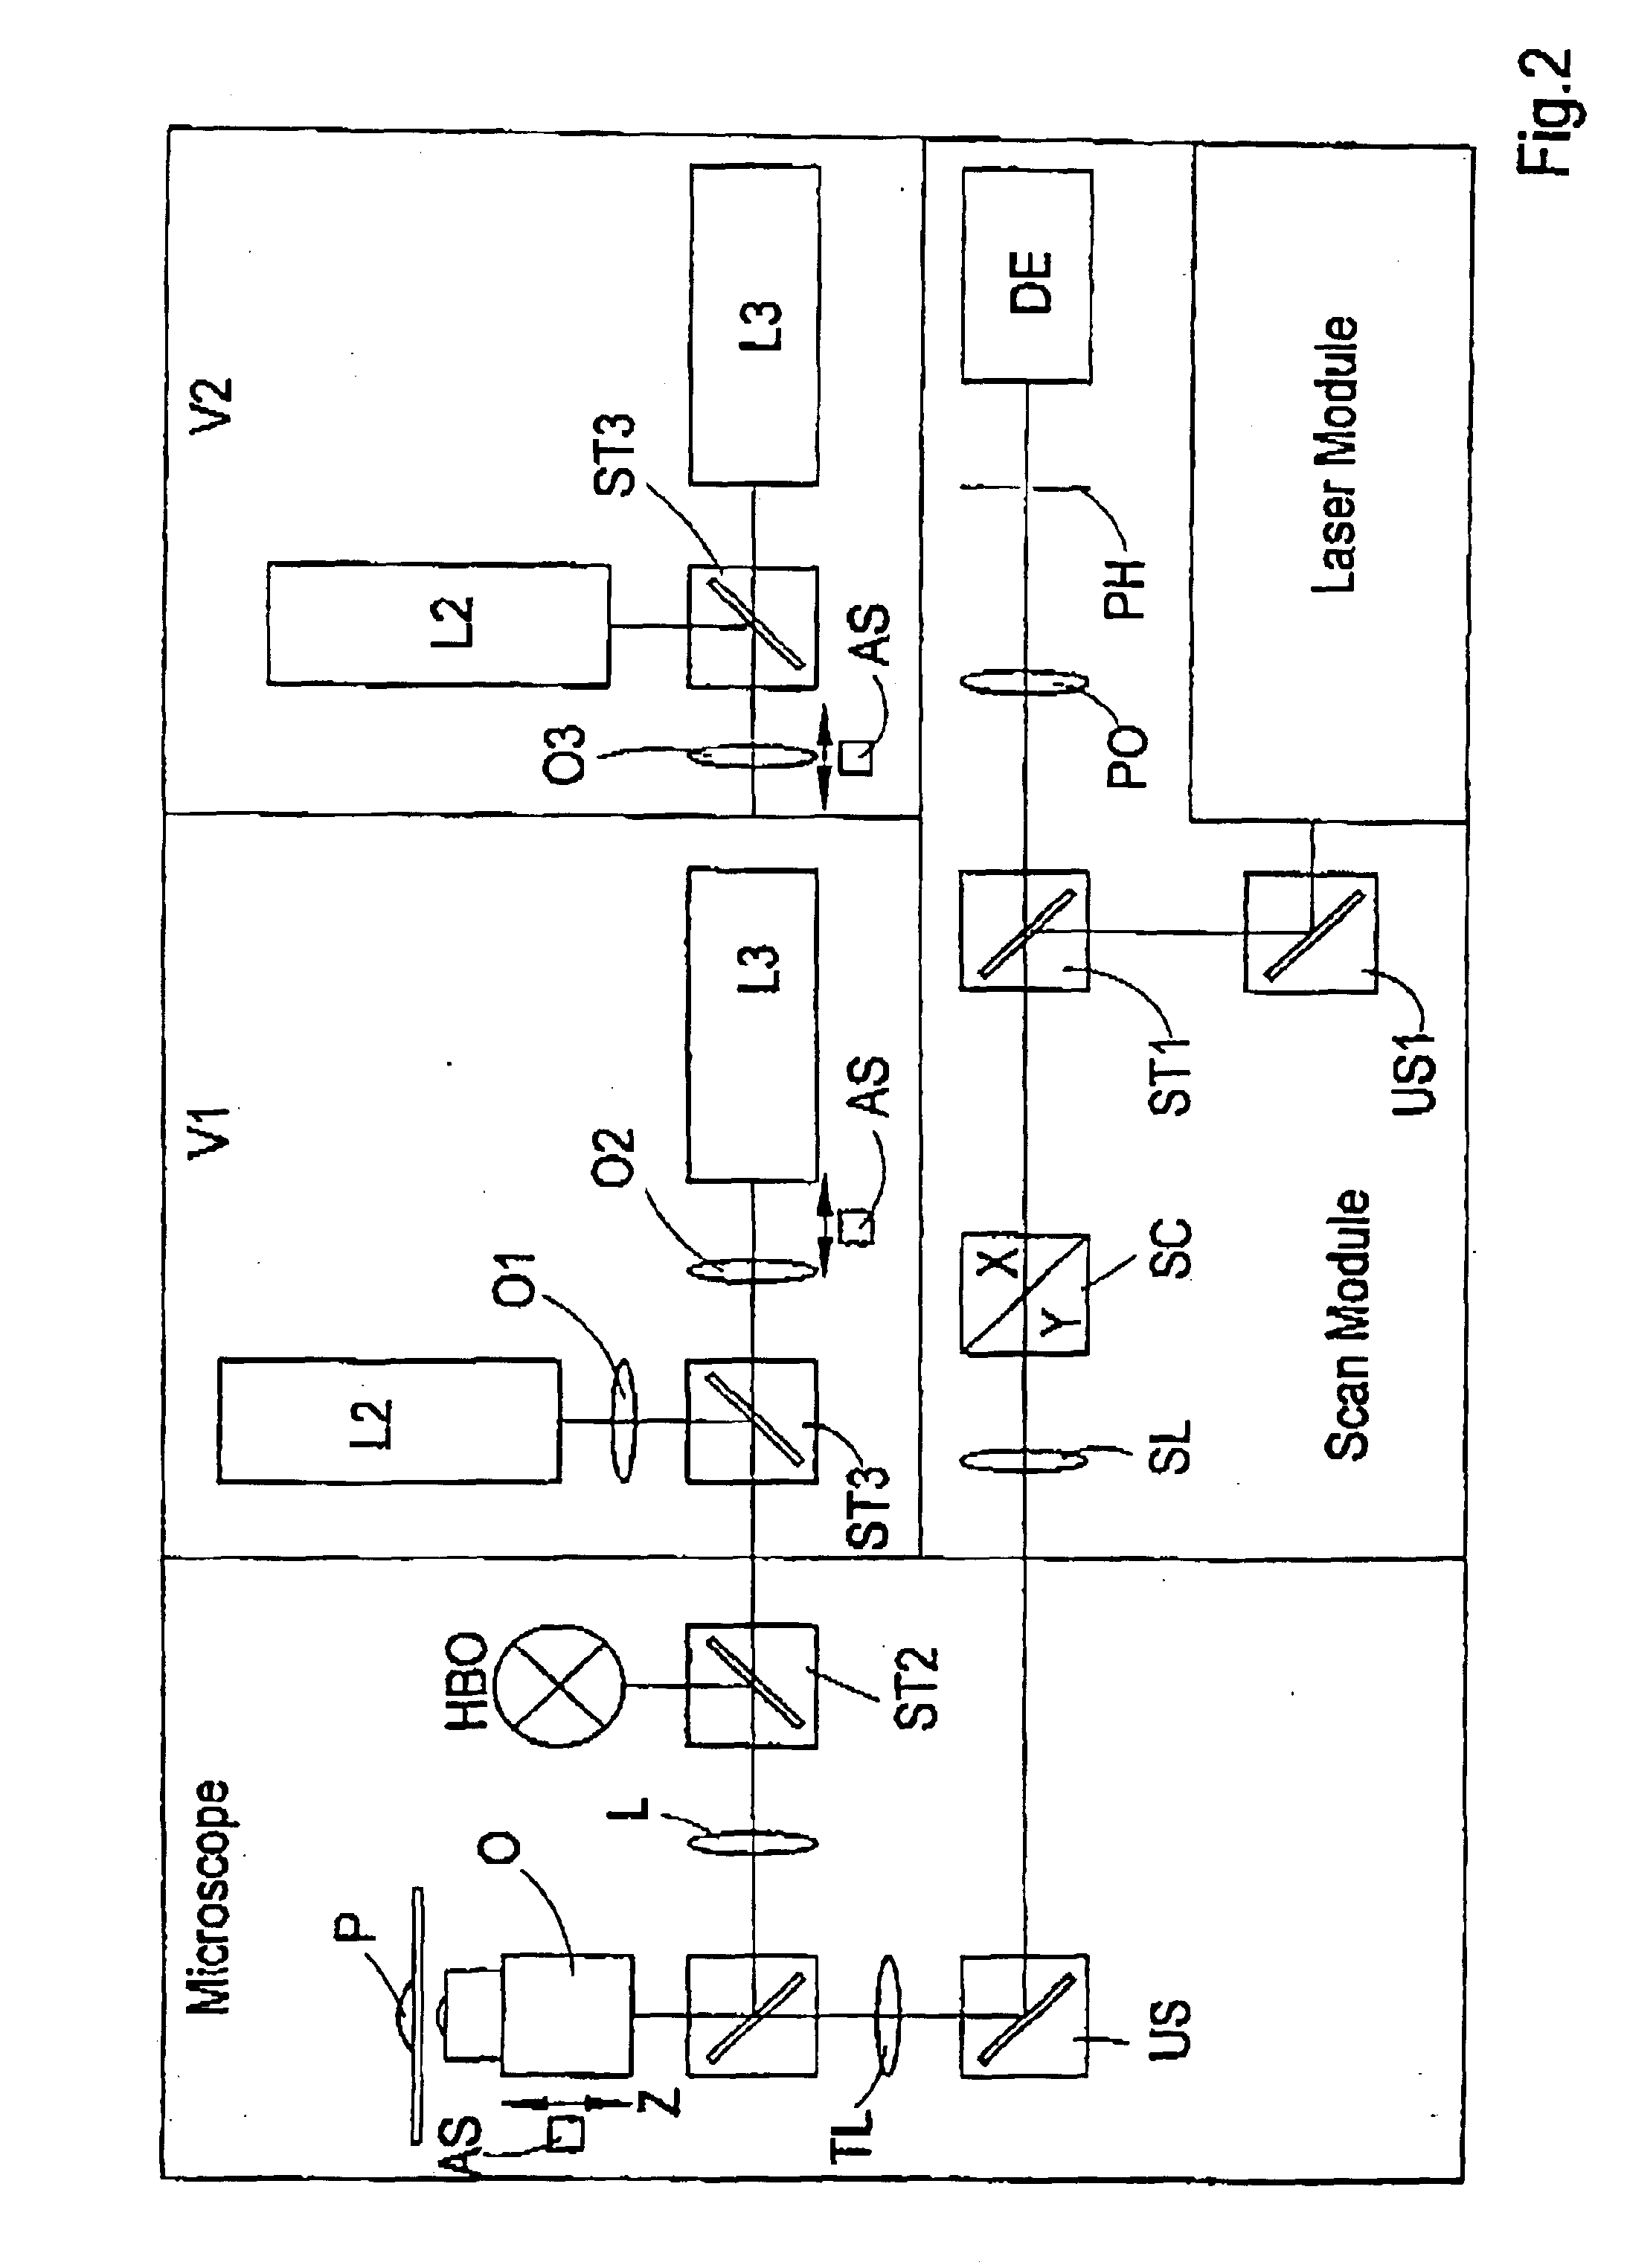 System for introducing optical tweezers and/or a treatment beam into a laser scanning microscope